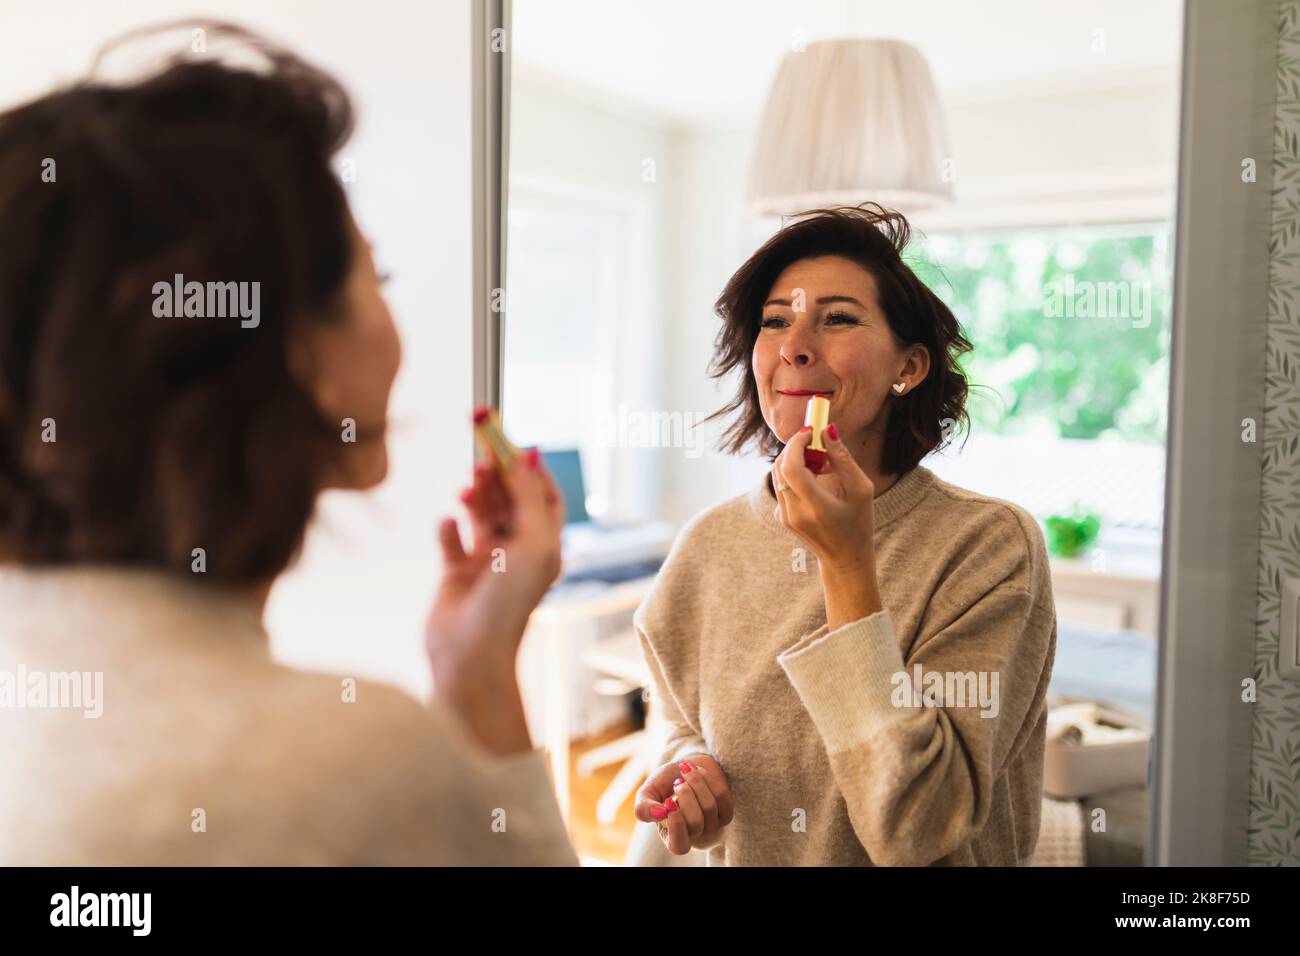 Mature woman looking in mirror and applying lipstick Stock Photo